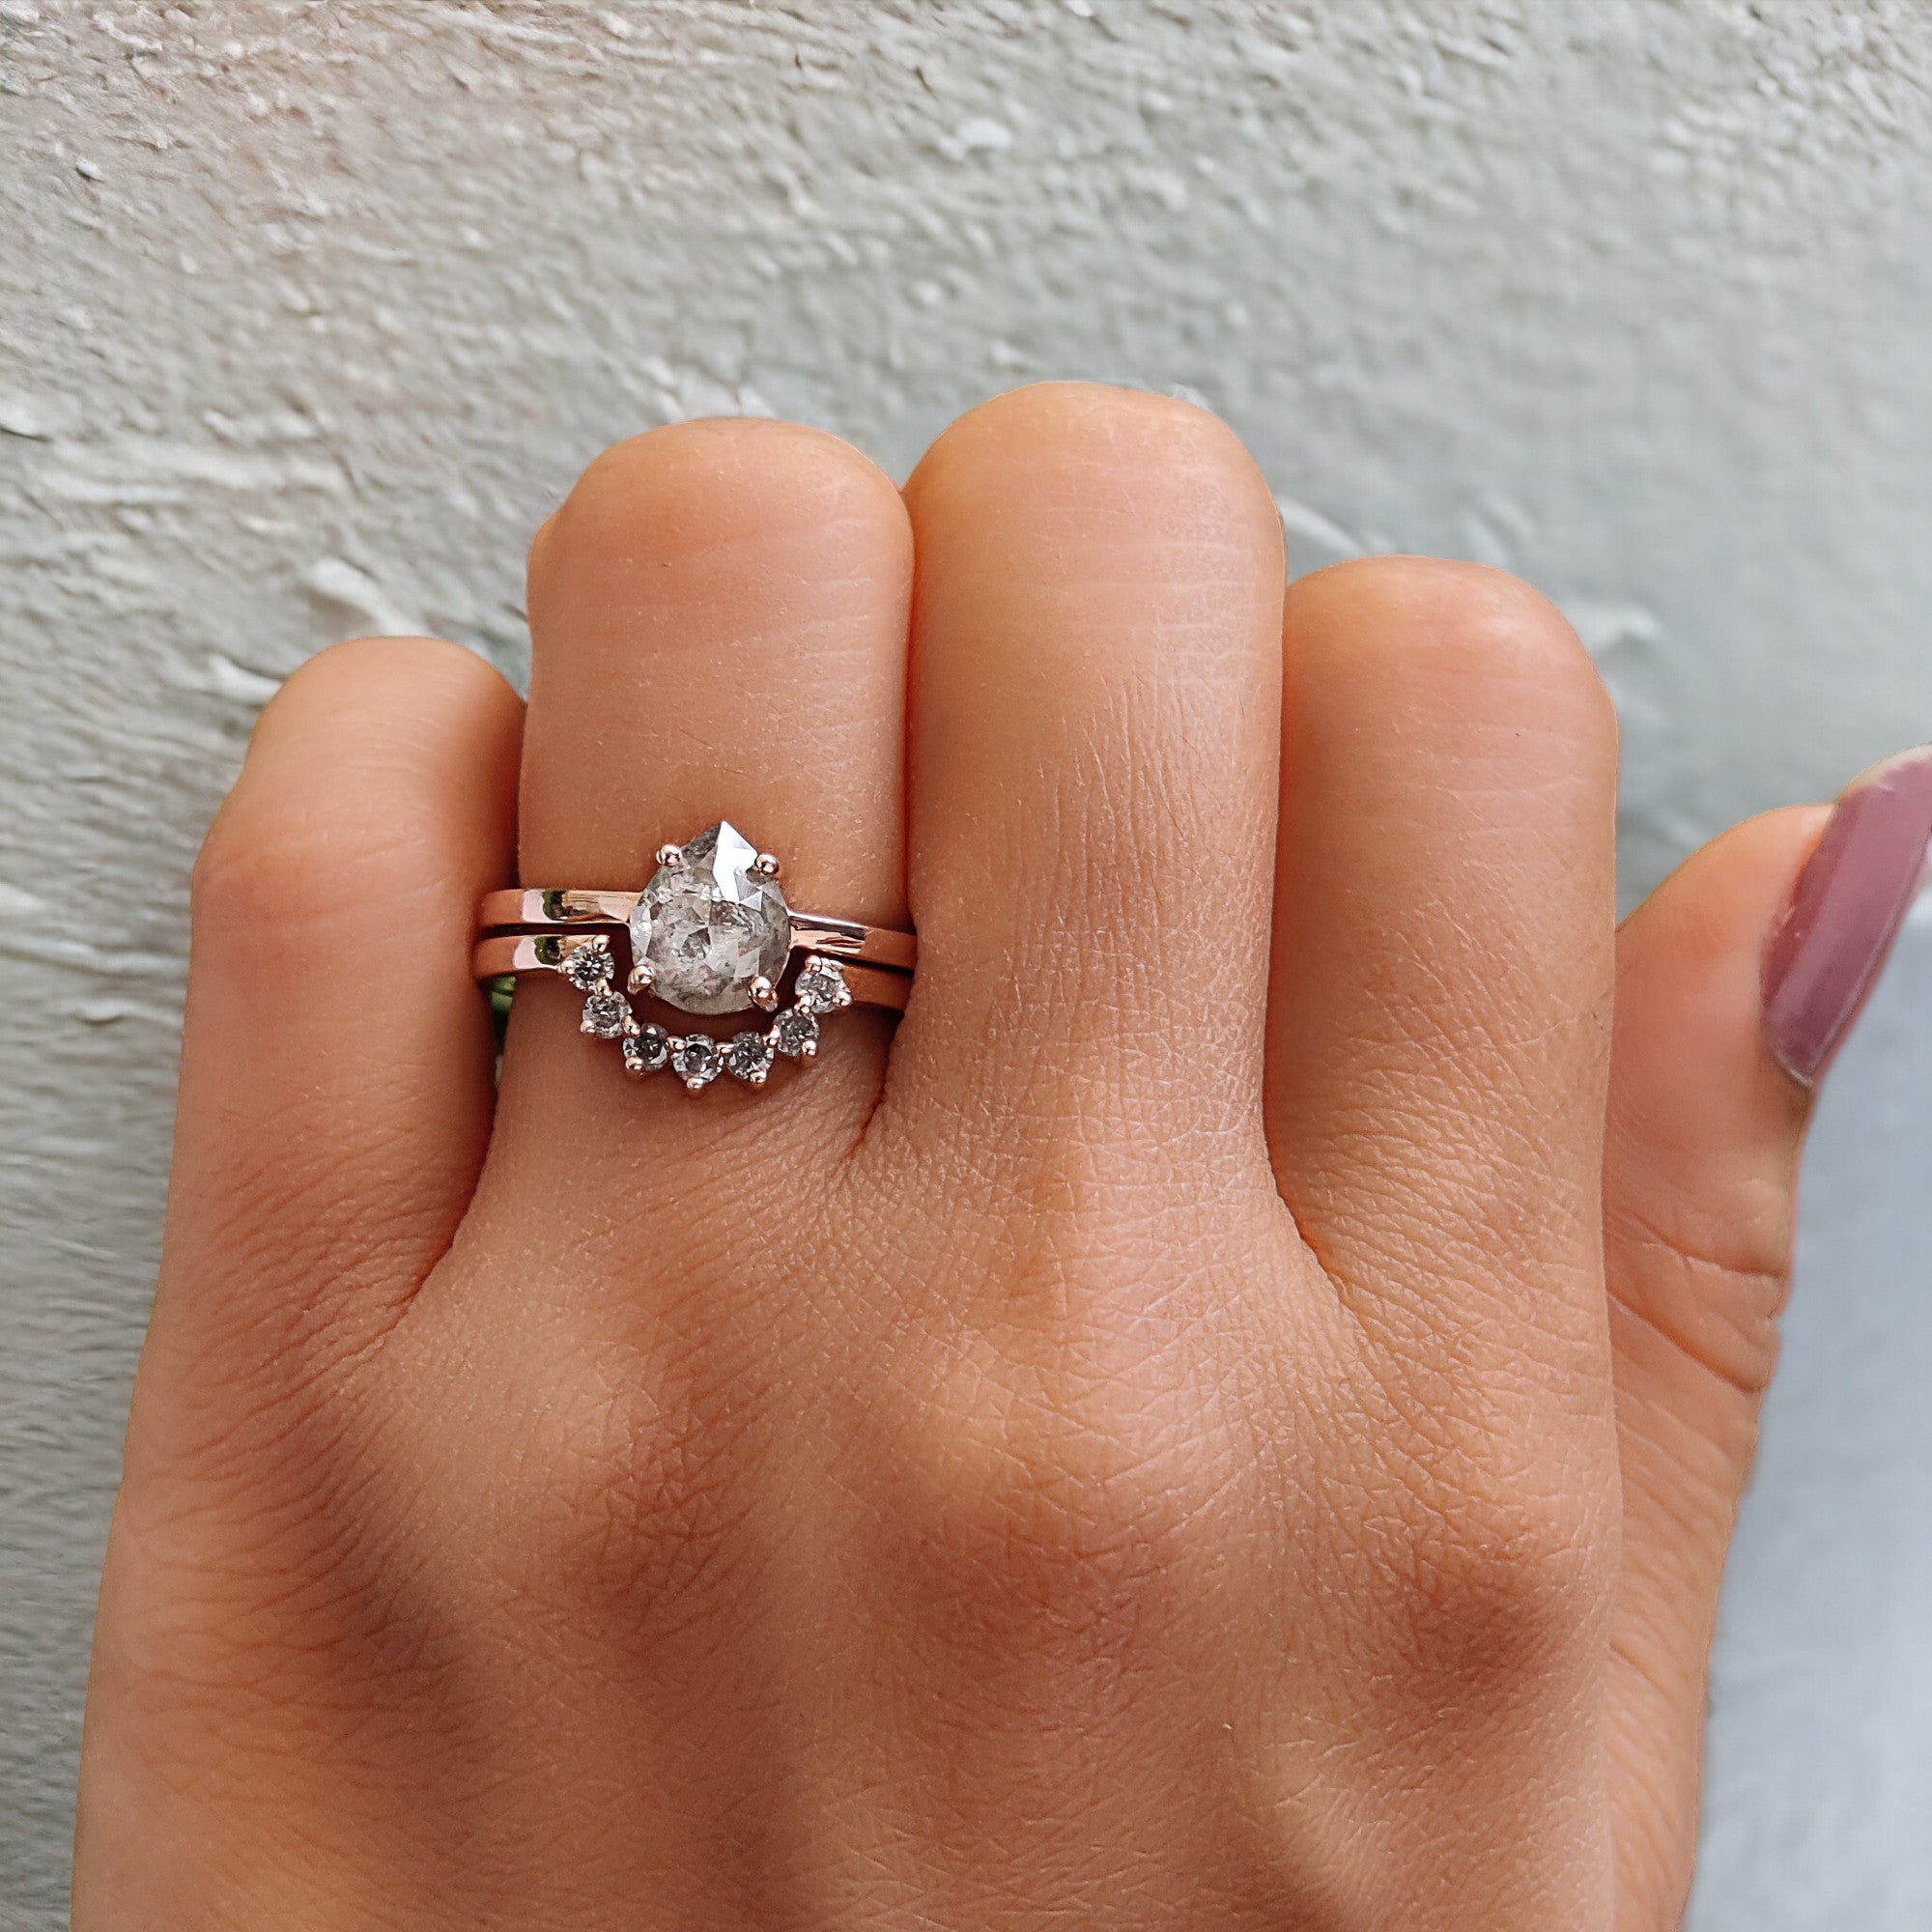 Pear Cut Salt And Pepper Diamond Ring 1.36 Ct 8.05 MM Pear Diamond Ring 14K Solid Rose Gold Silver Pear Engagement Ring Gift For Her QN9219